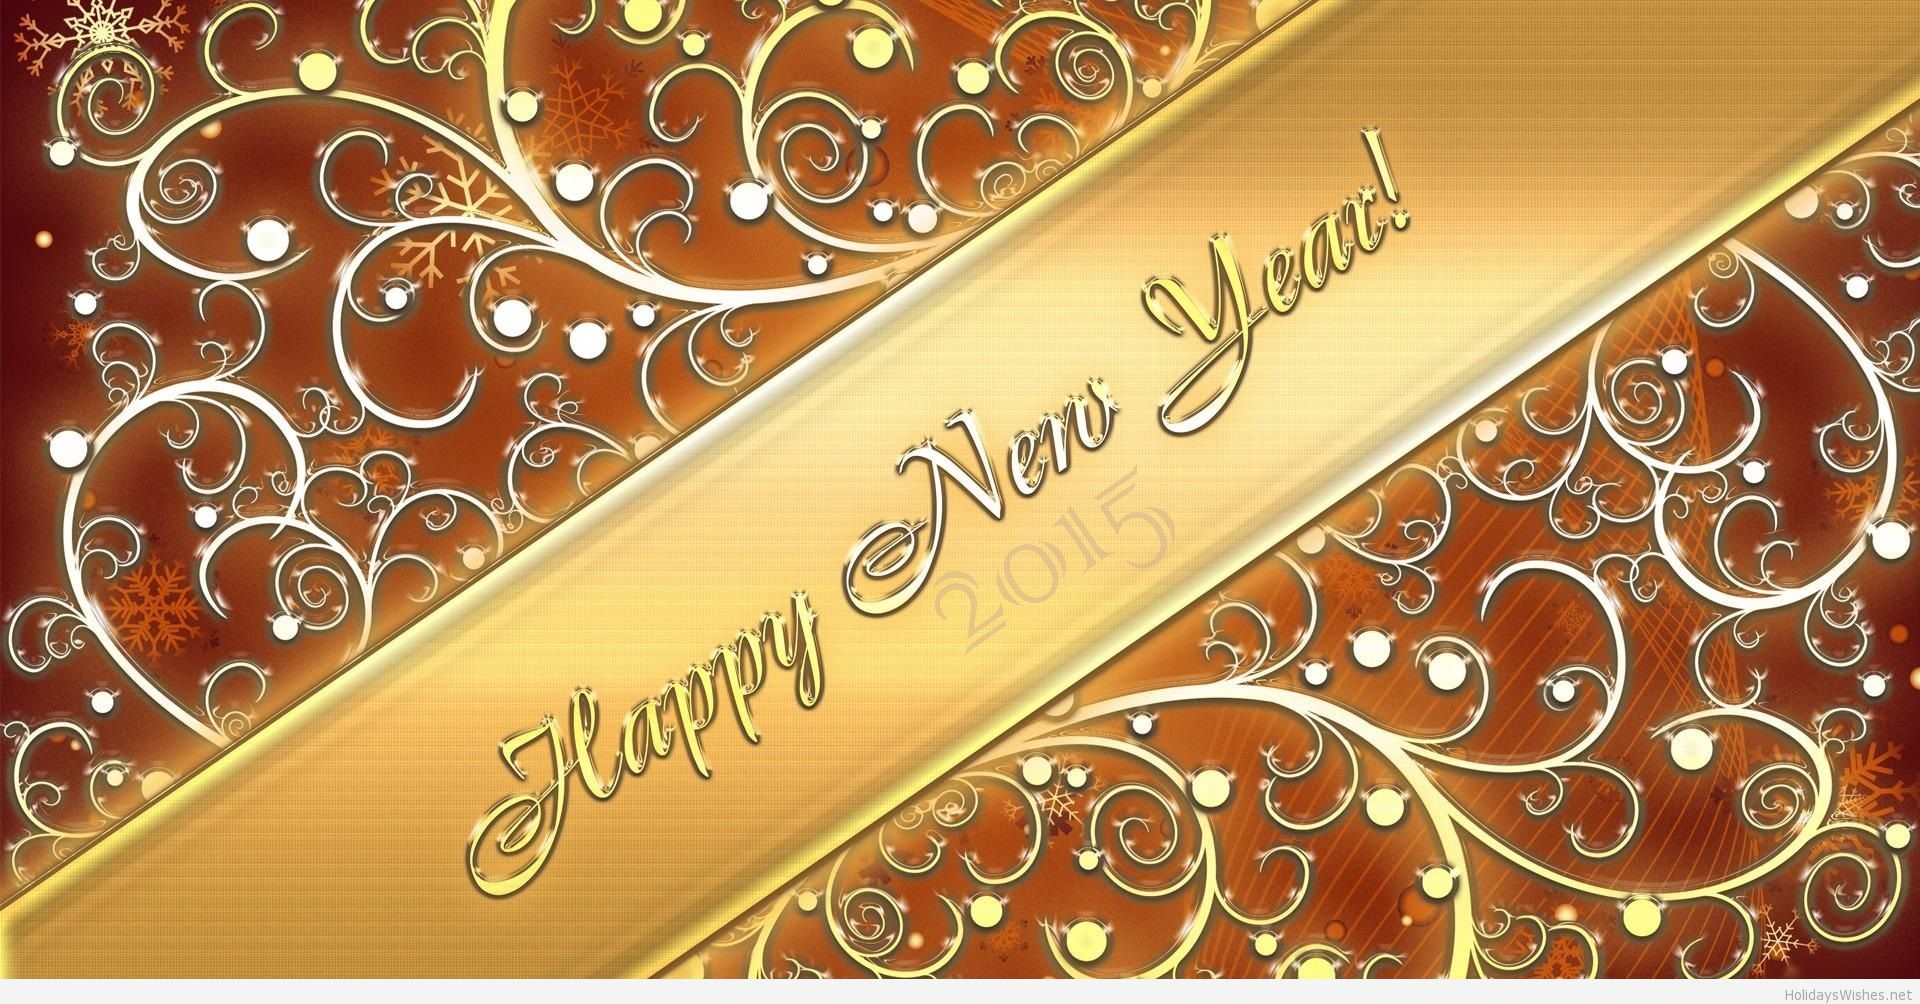 Happy New Year Wallpaper On